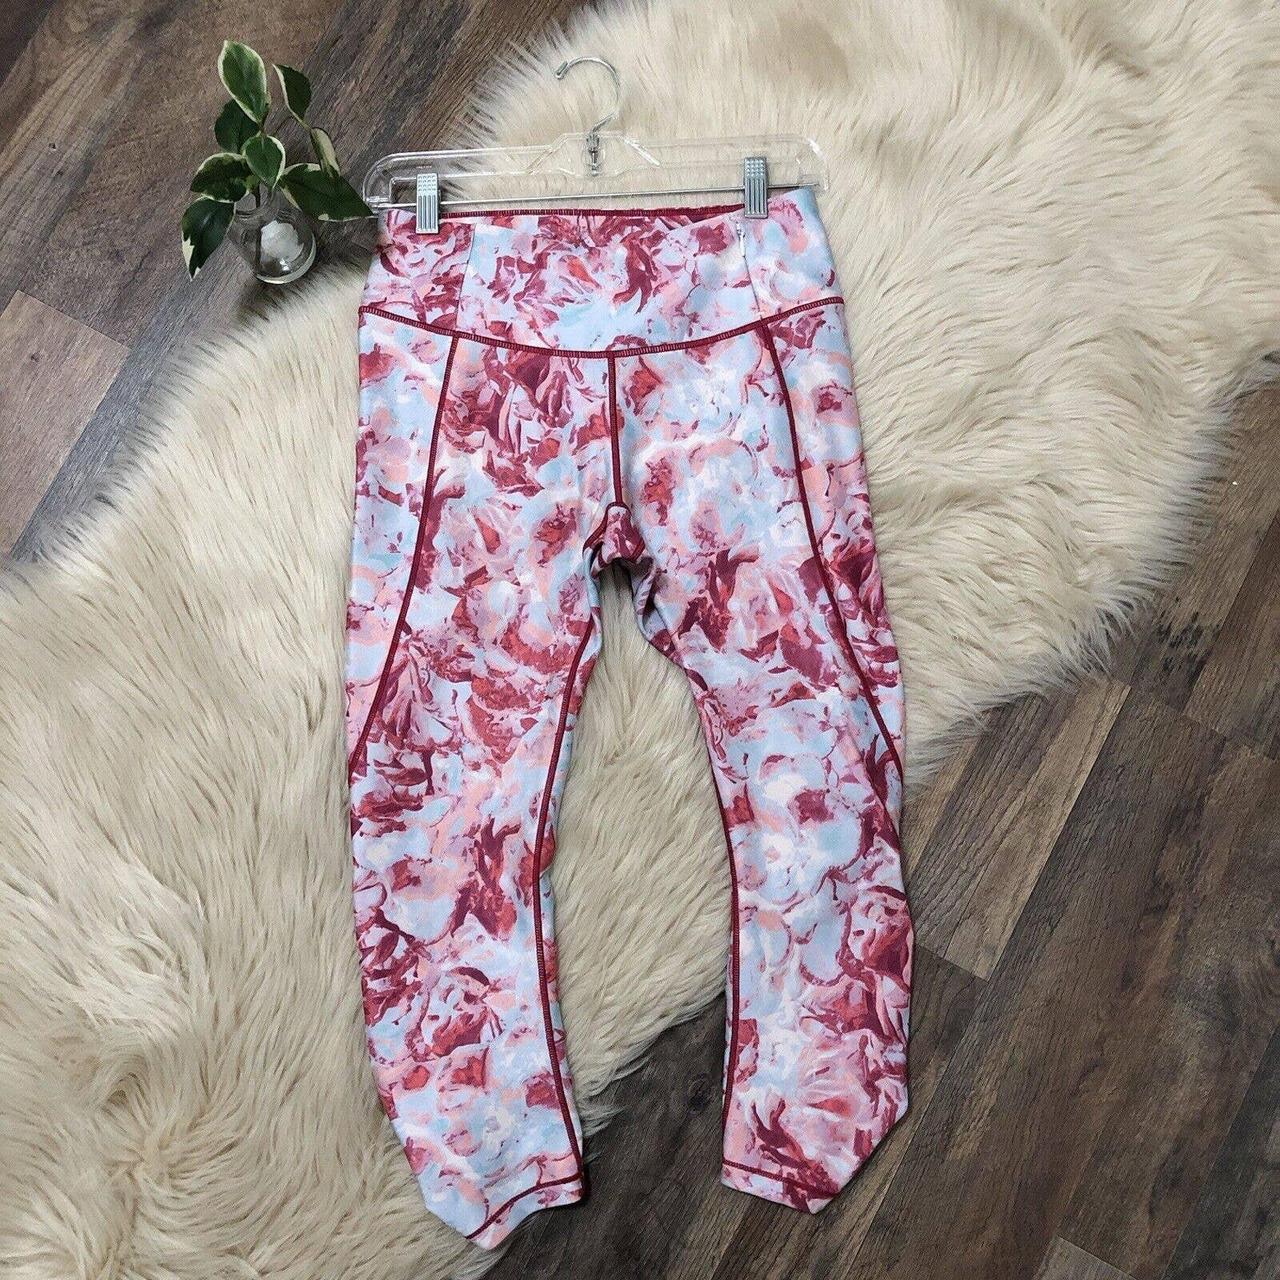 CALIA by Carrie Underwood Leggings Size Small Good - Depop